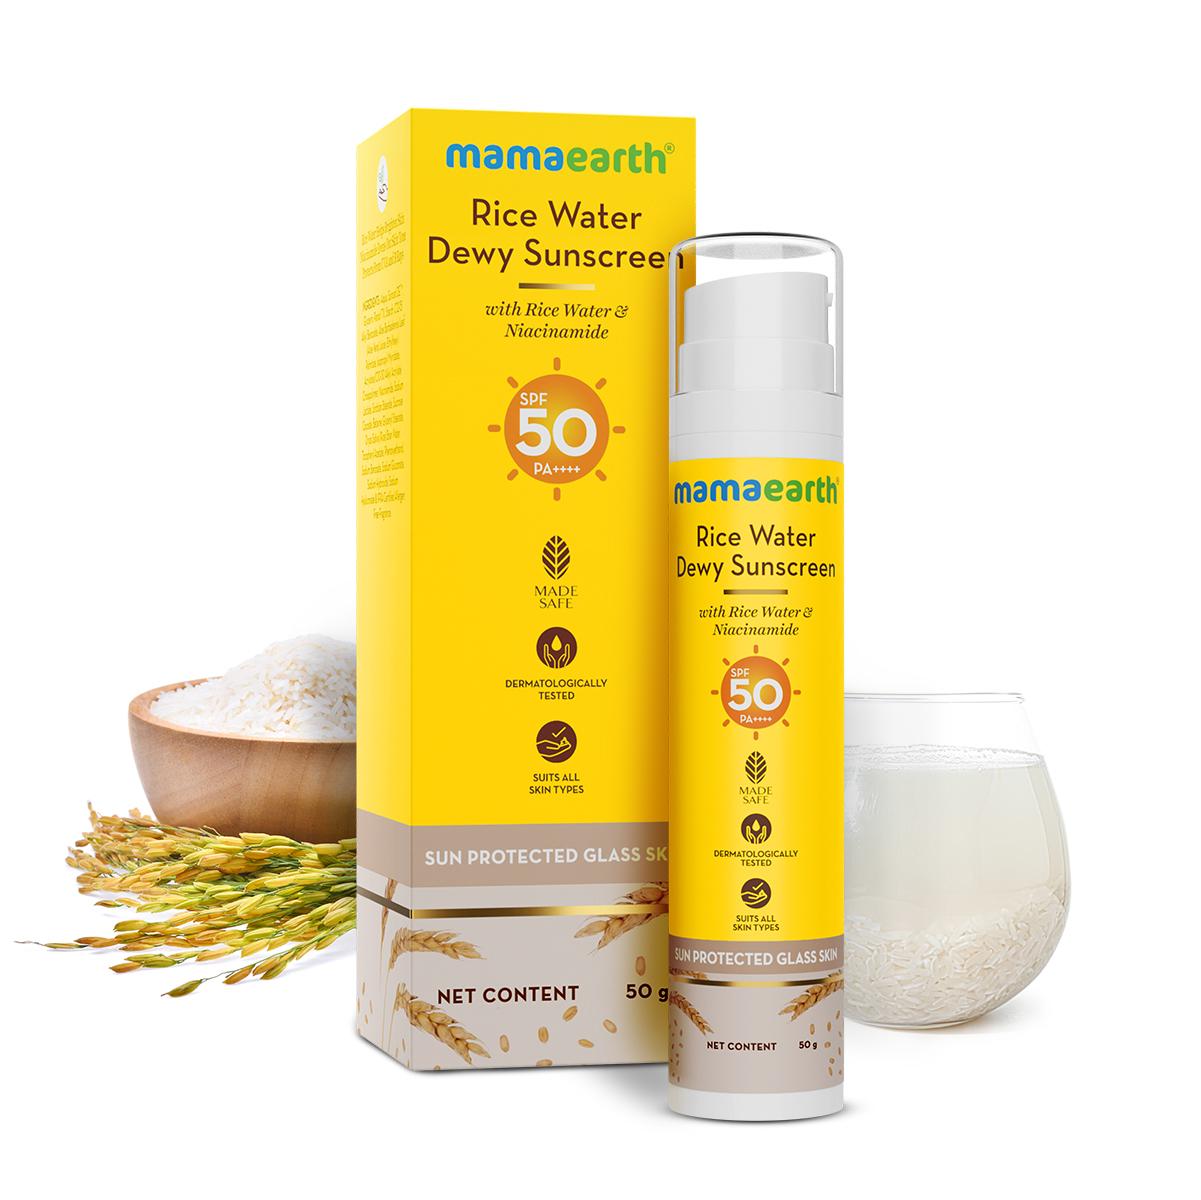 mamaearth rice water dewy sunscreen with spf 50 & pa++++ - 50g